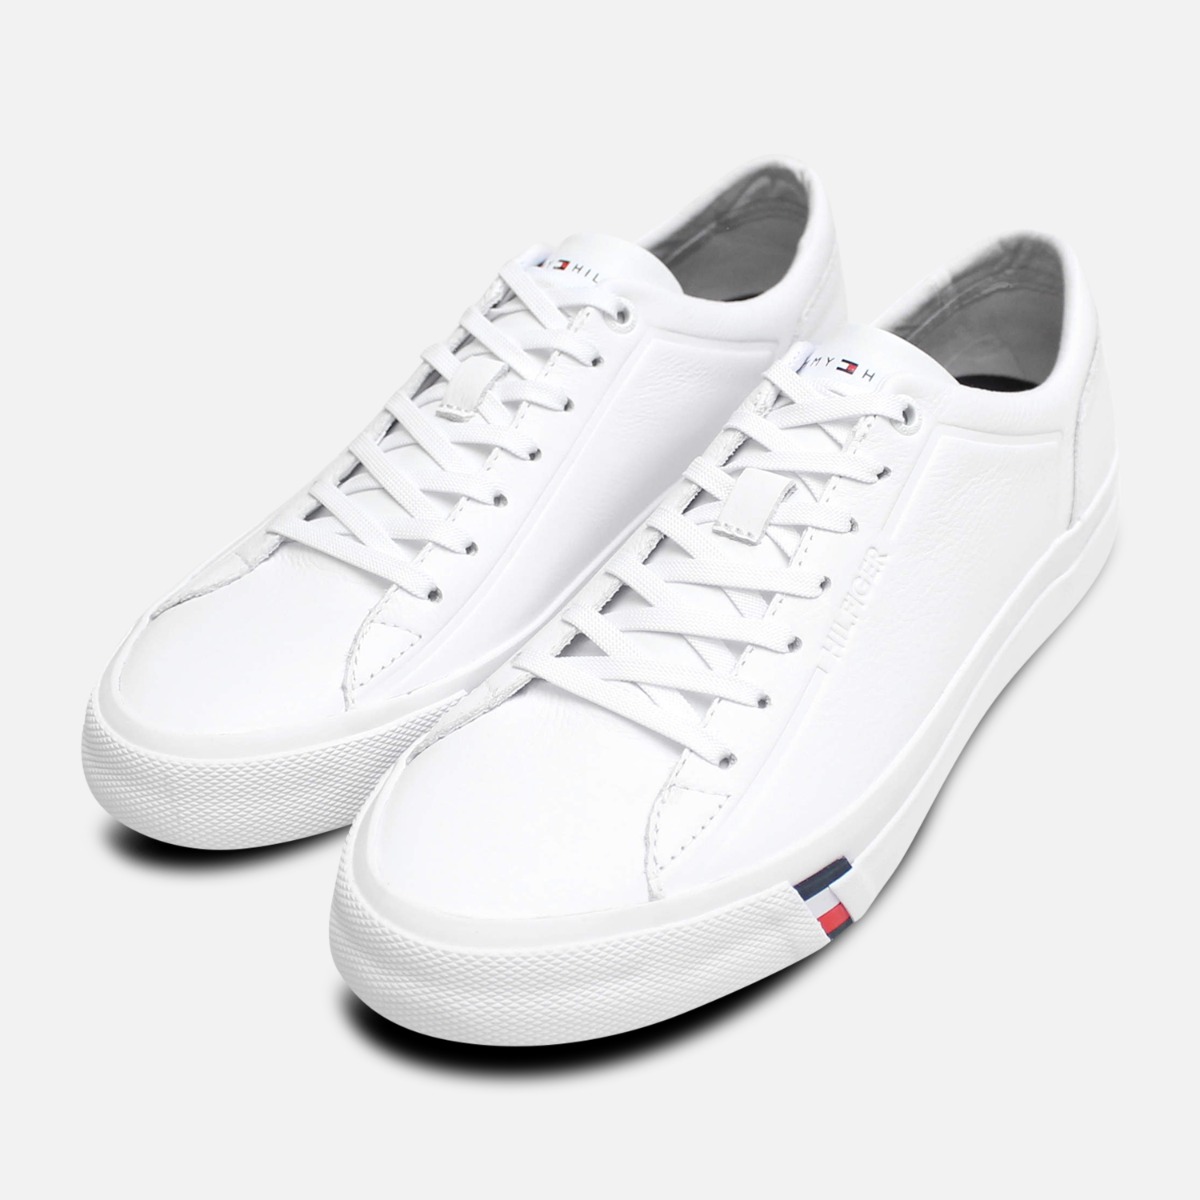 tommy hilfiger leather sneaker white